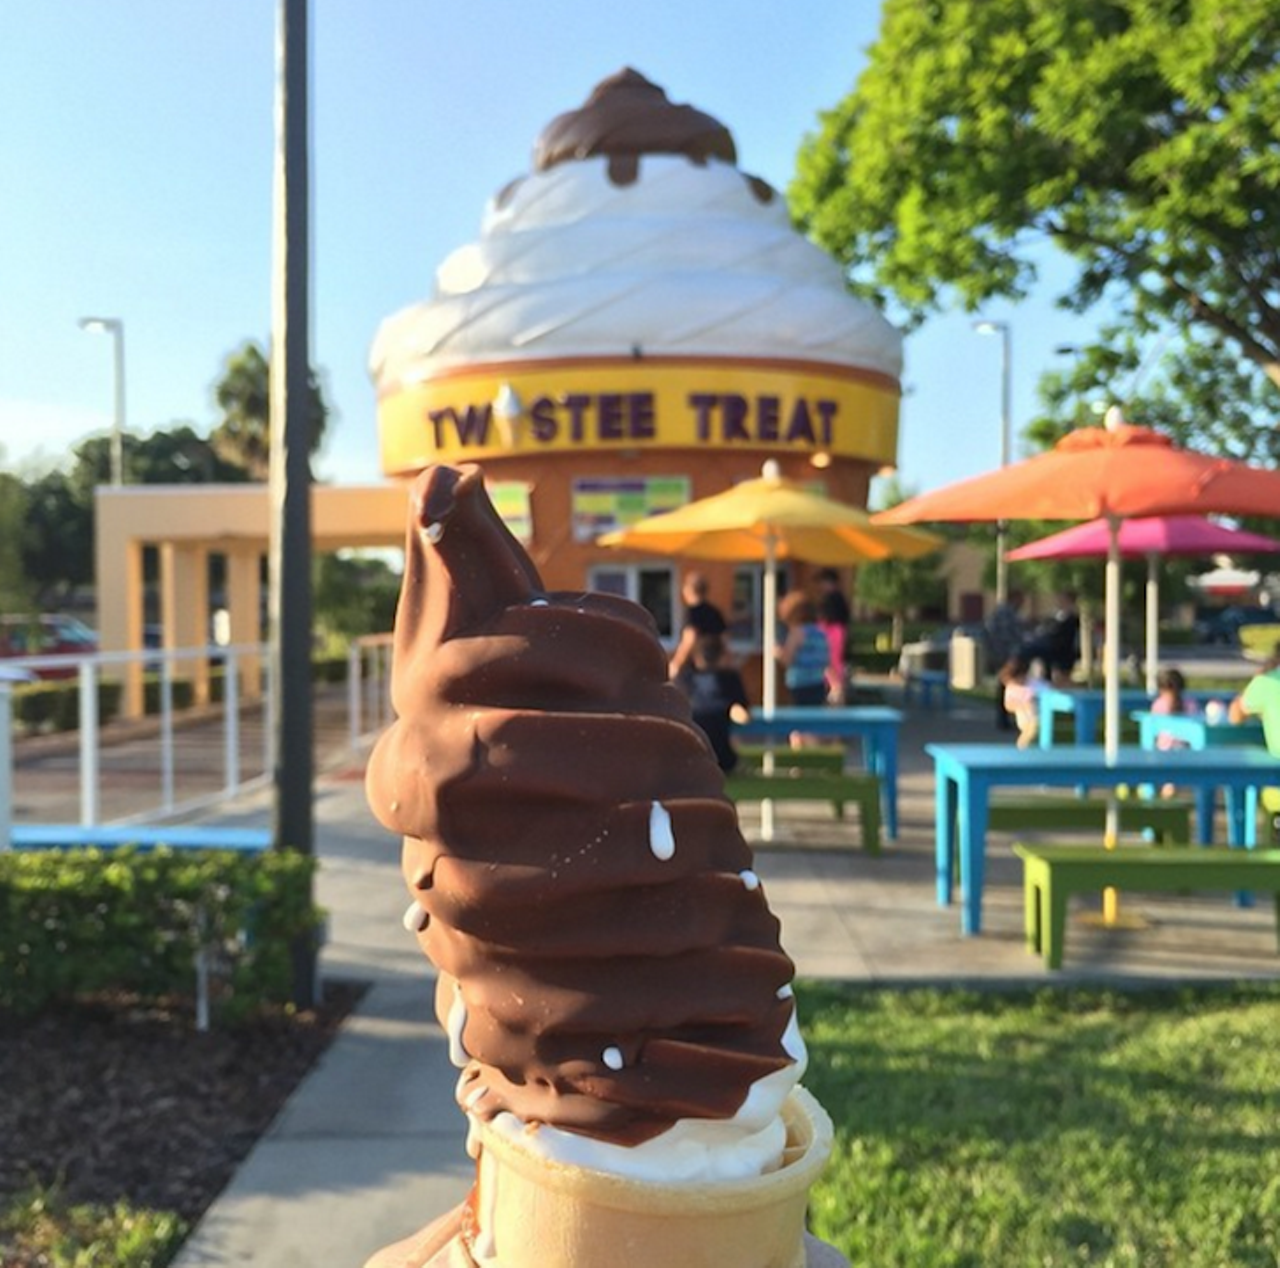  Twistee Treat
Open 12 p.m.-12 a.m.; 11933 E Colonial Dr, Orlando; $1-$6
Look out for the stand with the giant ice cream cone and bring your date over for some sprinkled soft serve deliciousness as if you had planned that all along. 
Photo via abdullah_np/Instagram